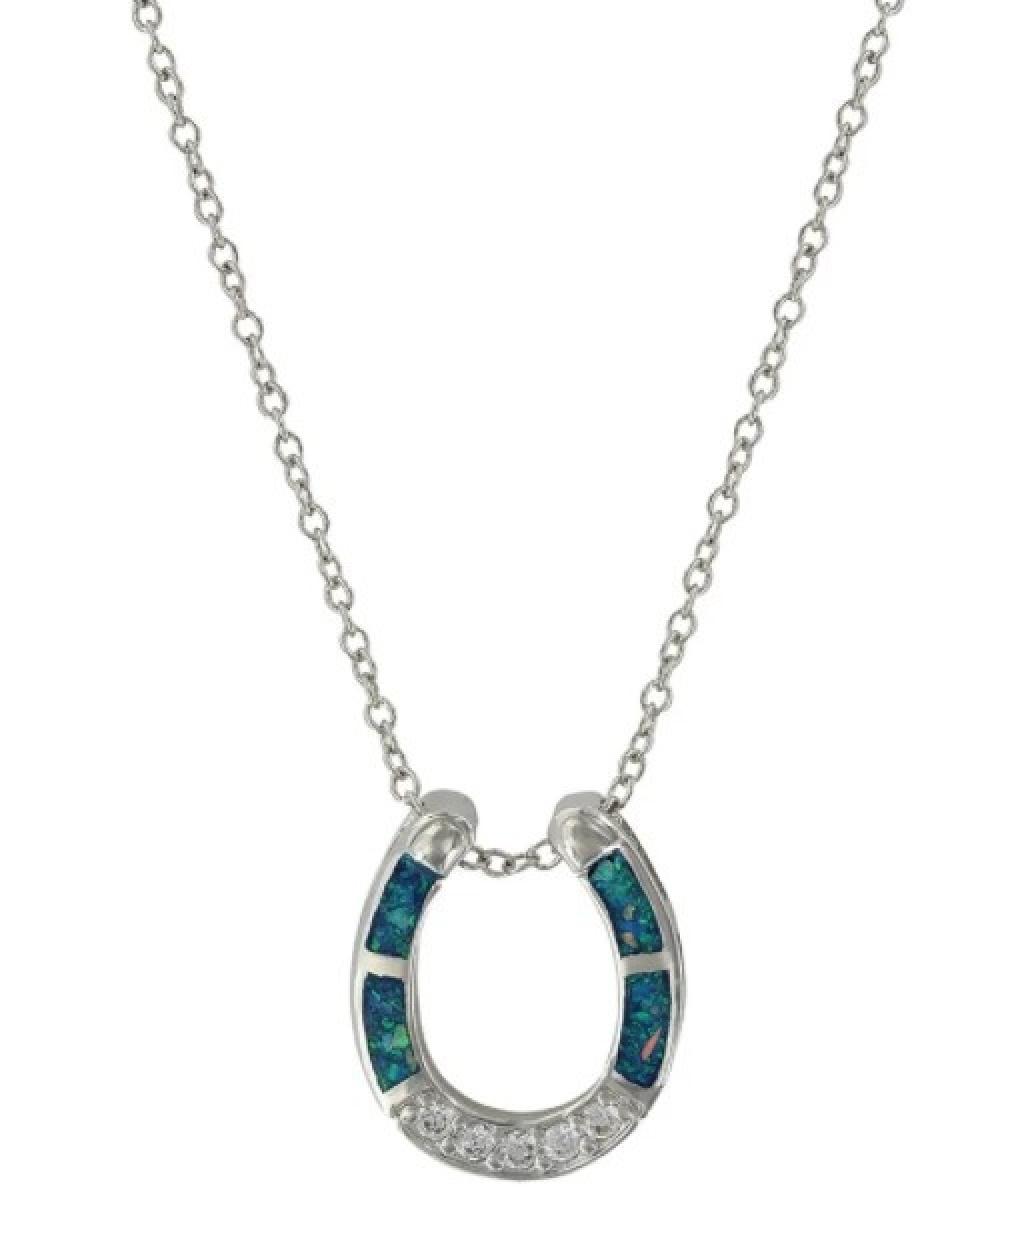 Montana Silversmiths River of Lights Stars in Water Horseshoe Necklace